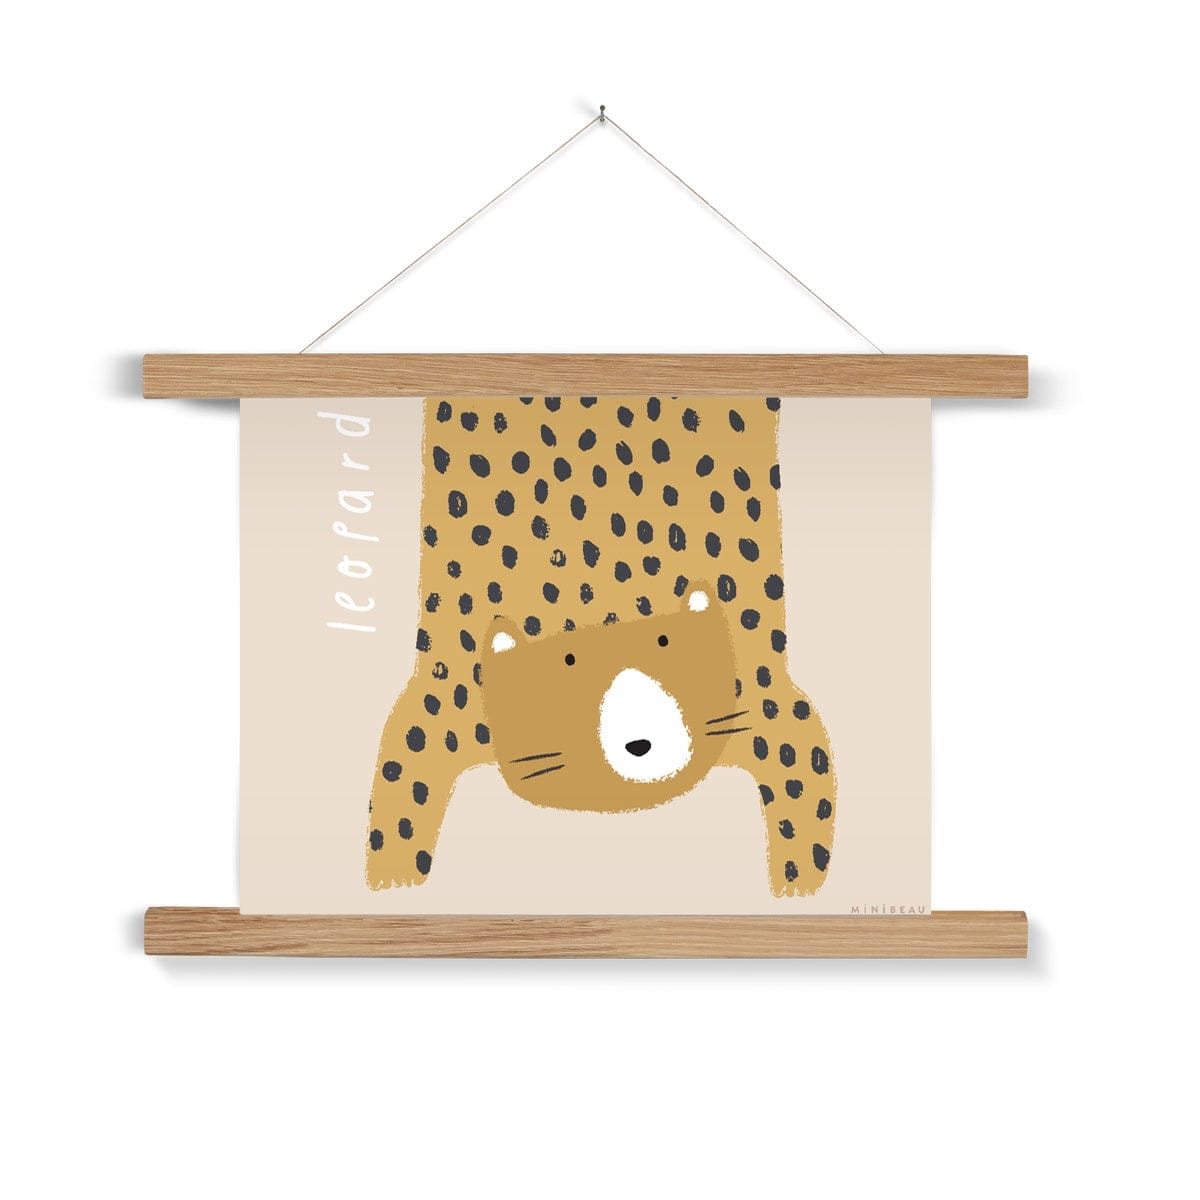 Our Leopard art print shows a hand-drawn leopard hanging down in to the picture, lifting it's head to look out at us on a beige background, with the word leopard written alongside it, in a natural wooden hanger, hanging from a nail in a white wall